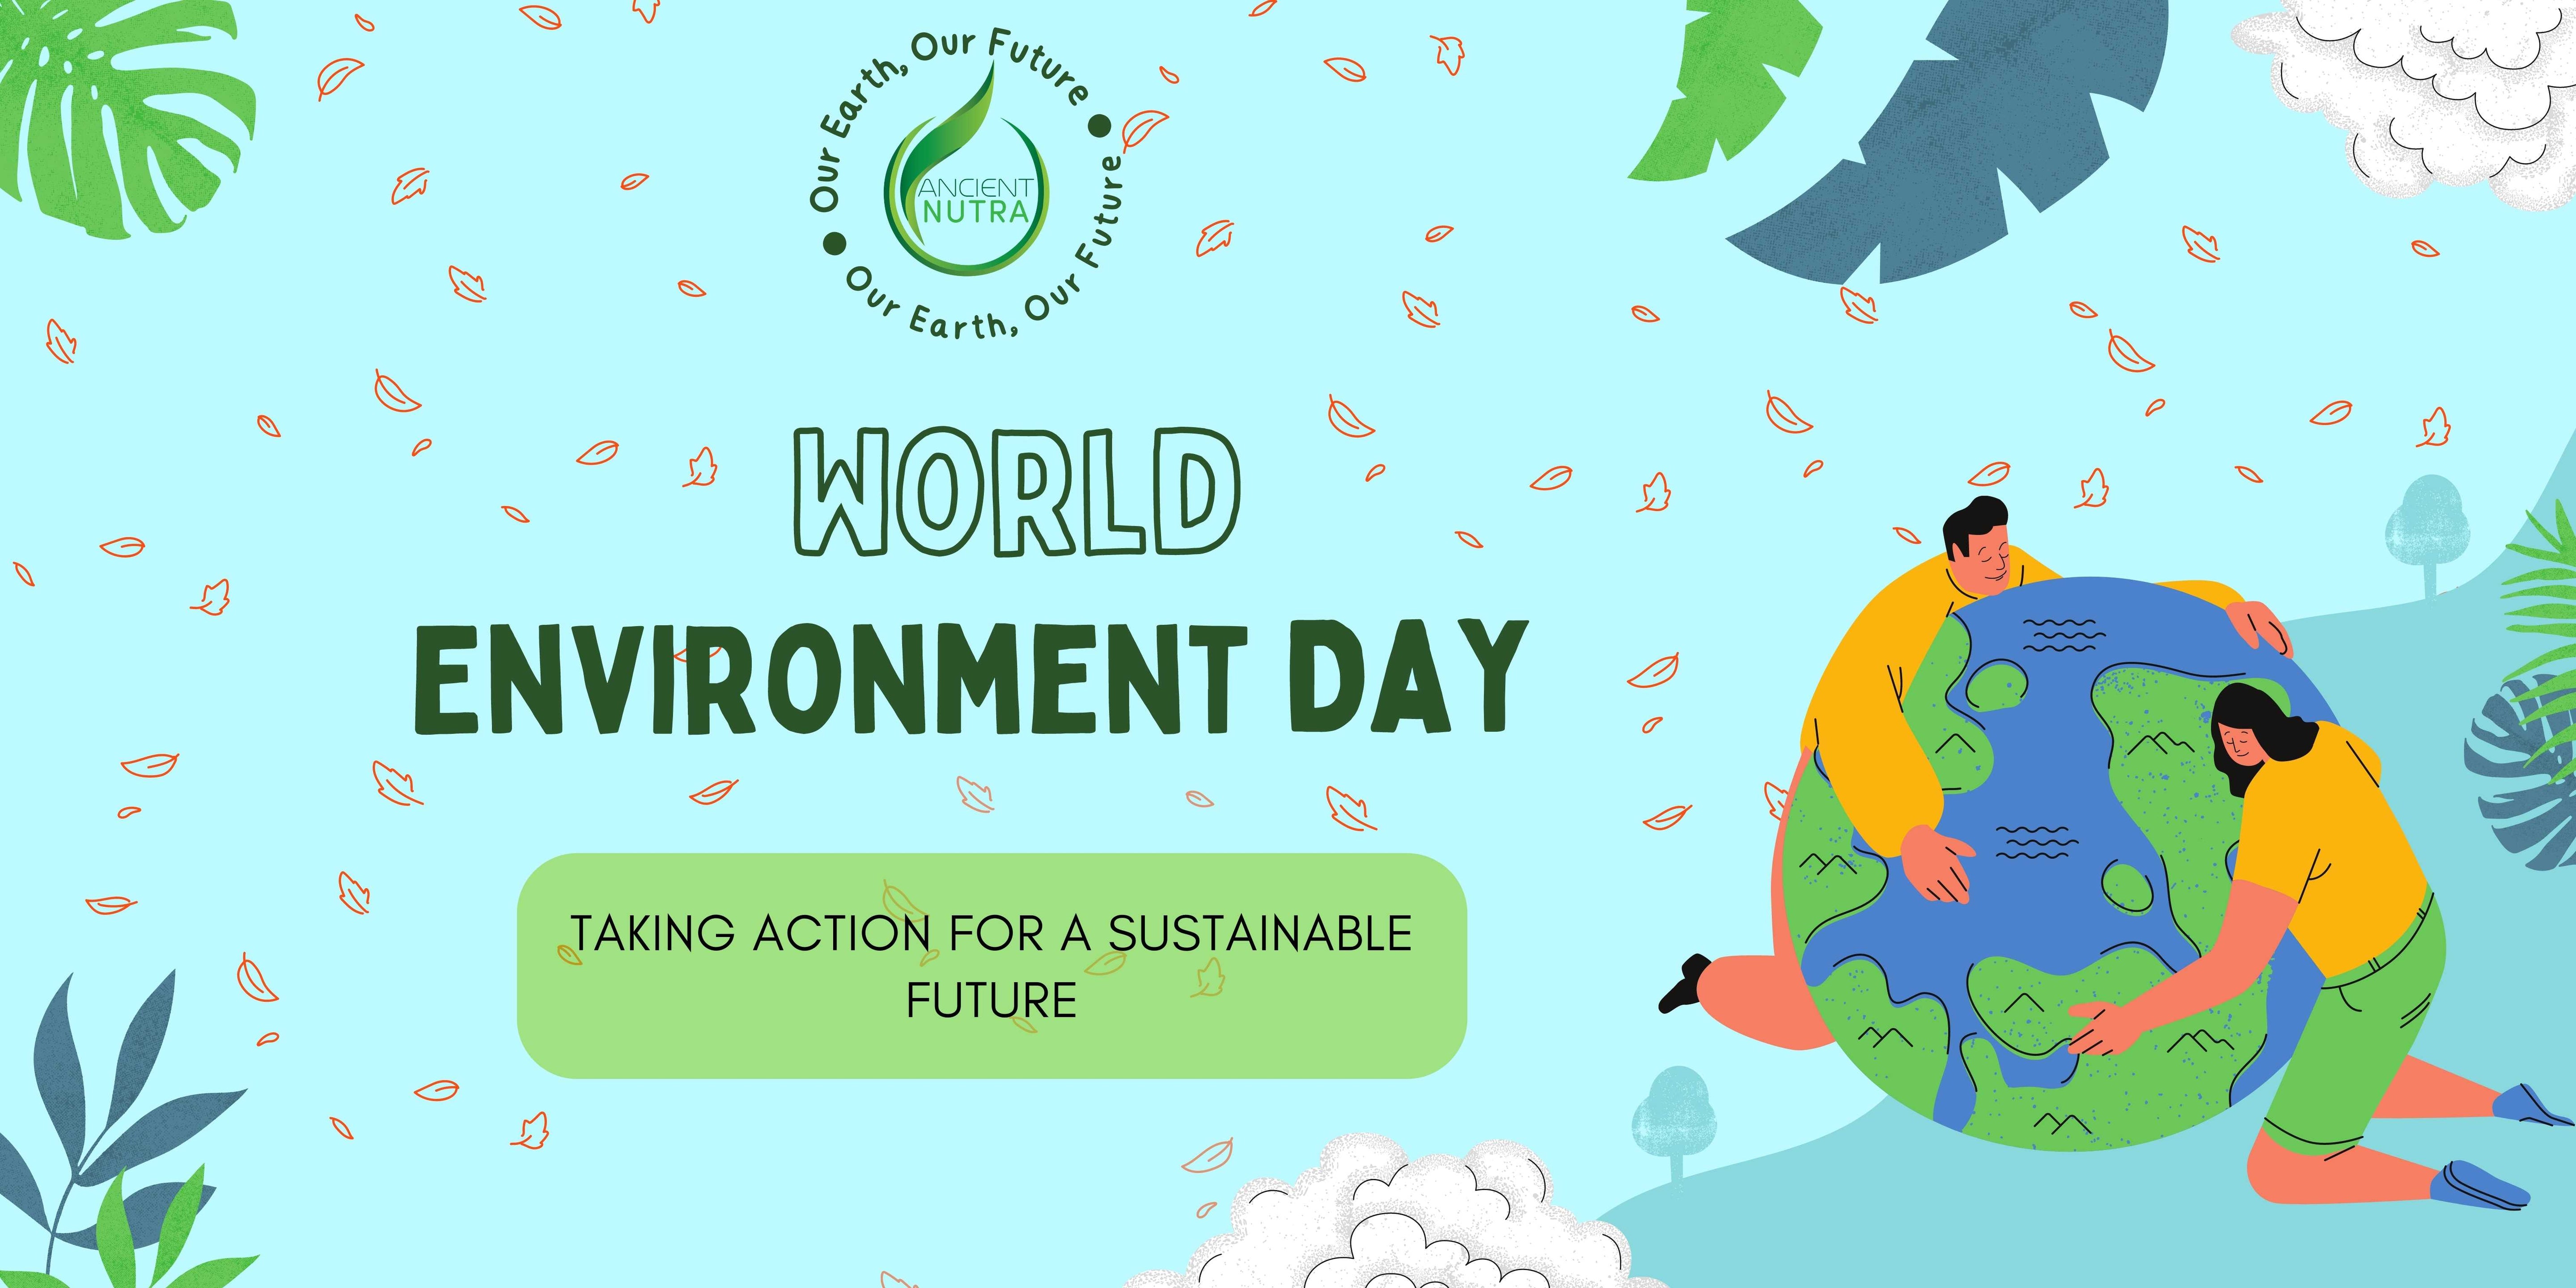 World Environment Day: Acting for a Sustainable Future